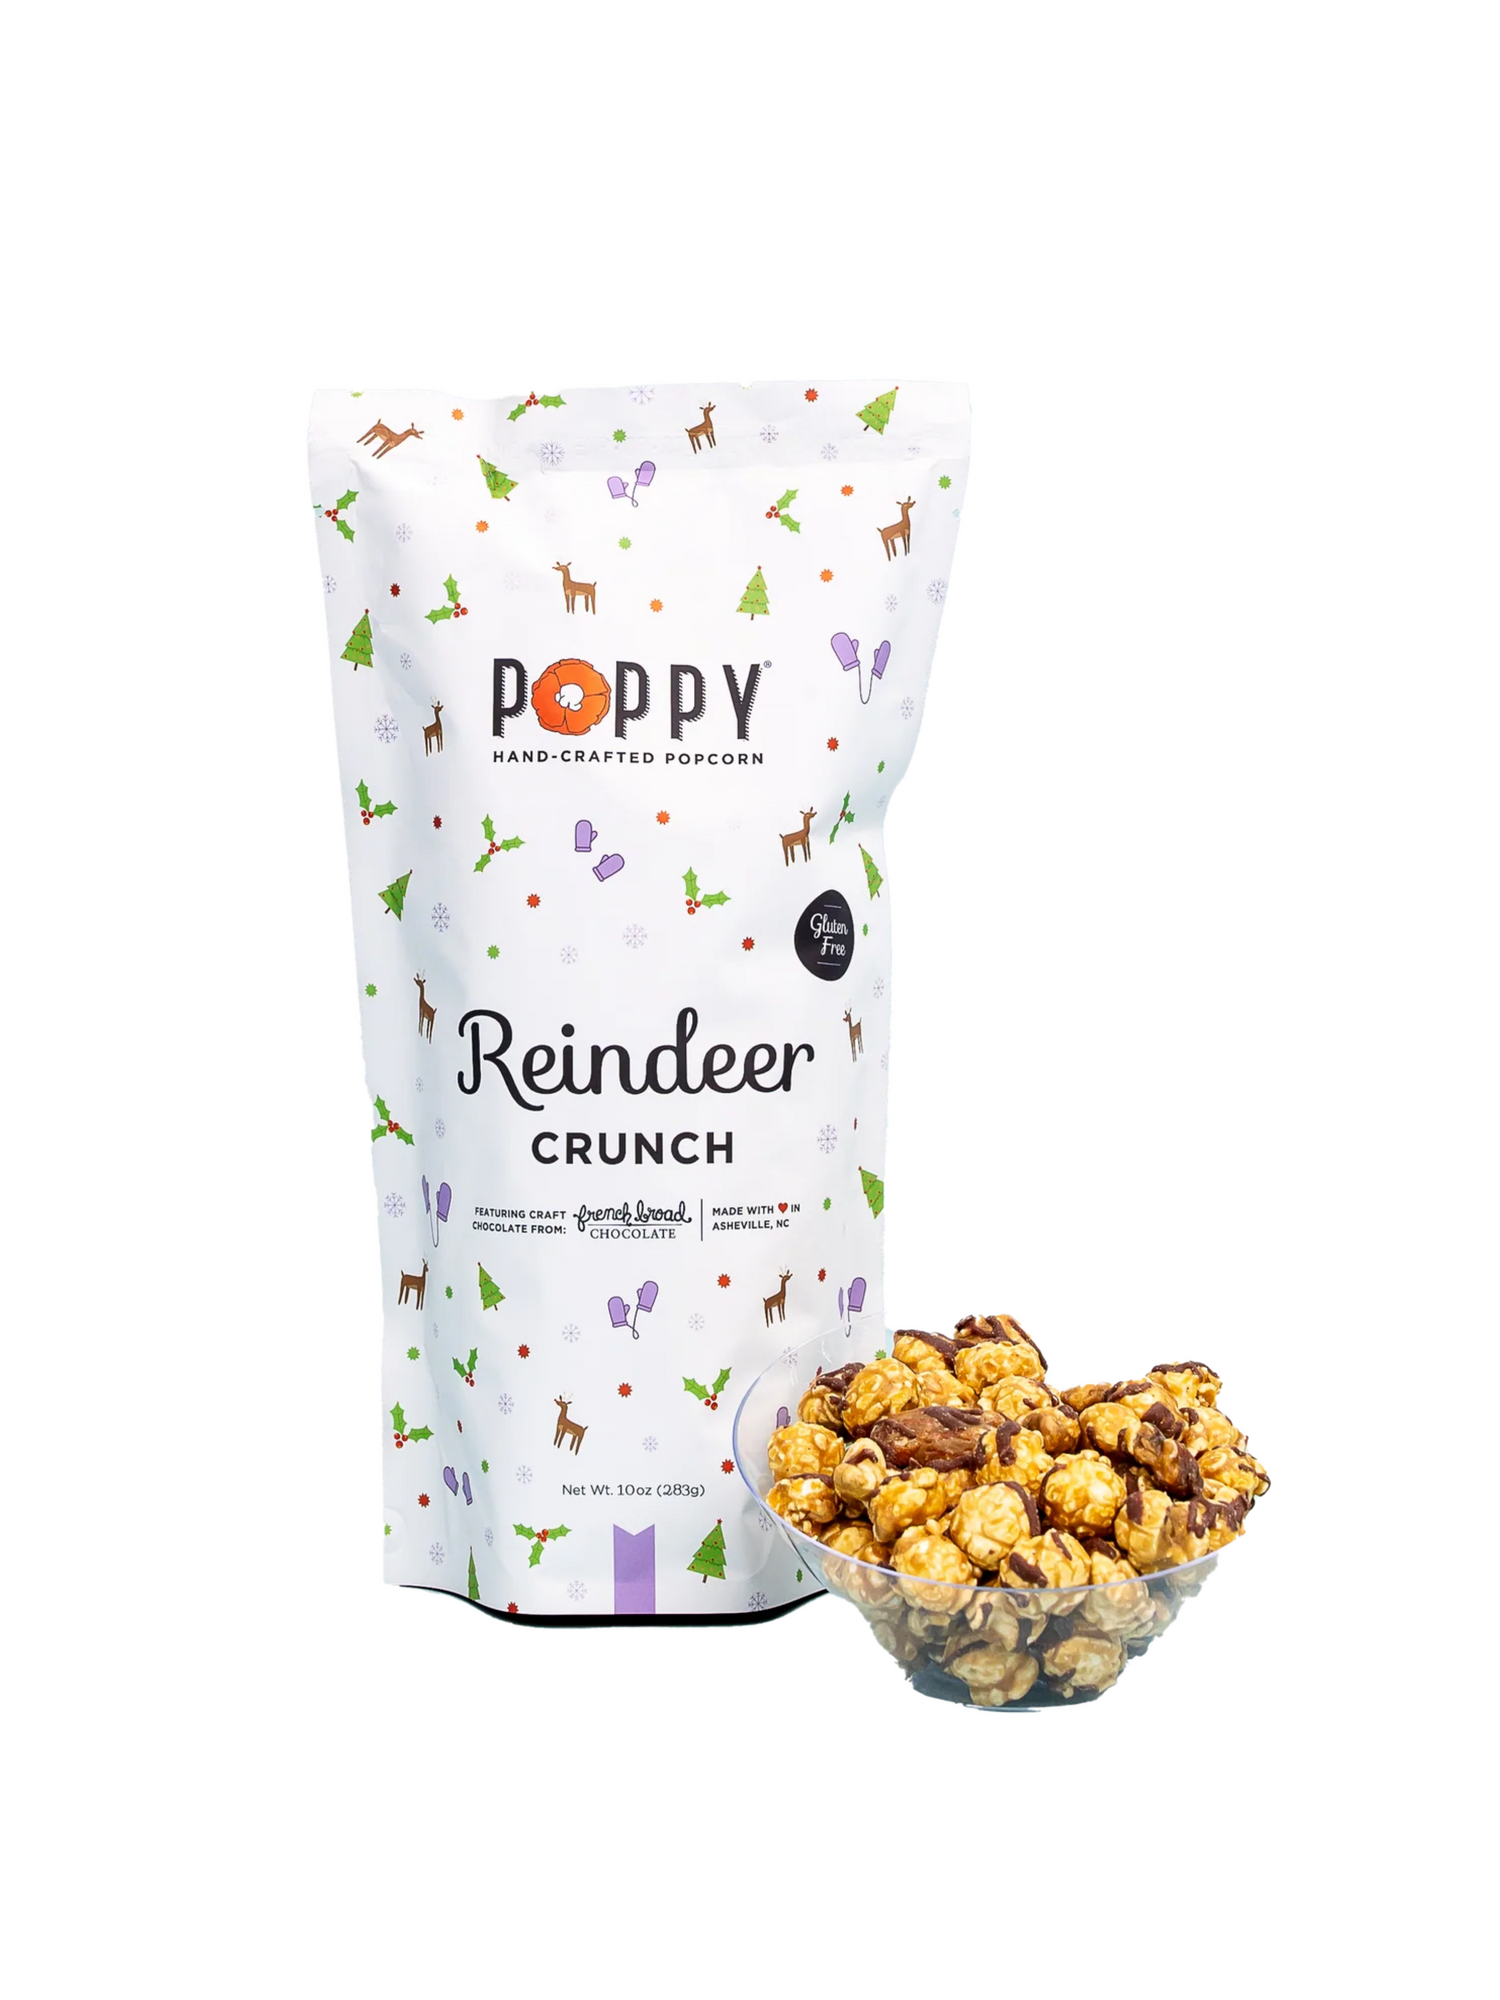 REINDEER CRUNCH POPPY HAND-CRAFTED POPCORN - THE HIP EAGLE BOUTIQUE